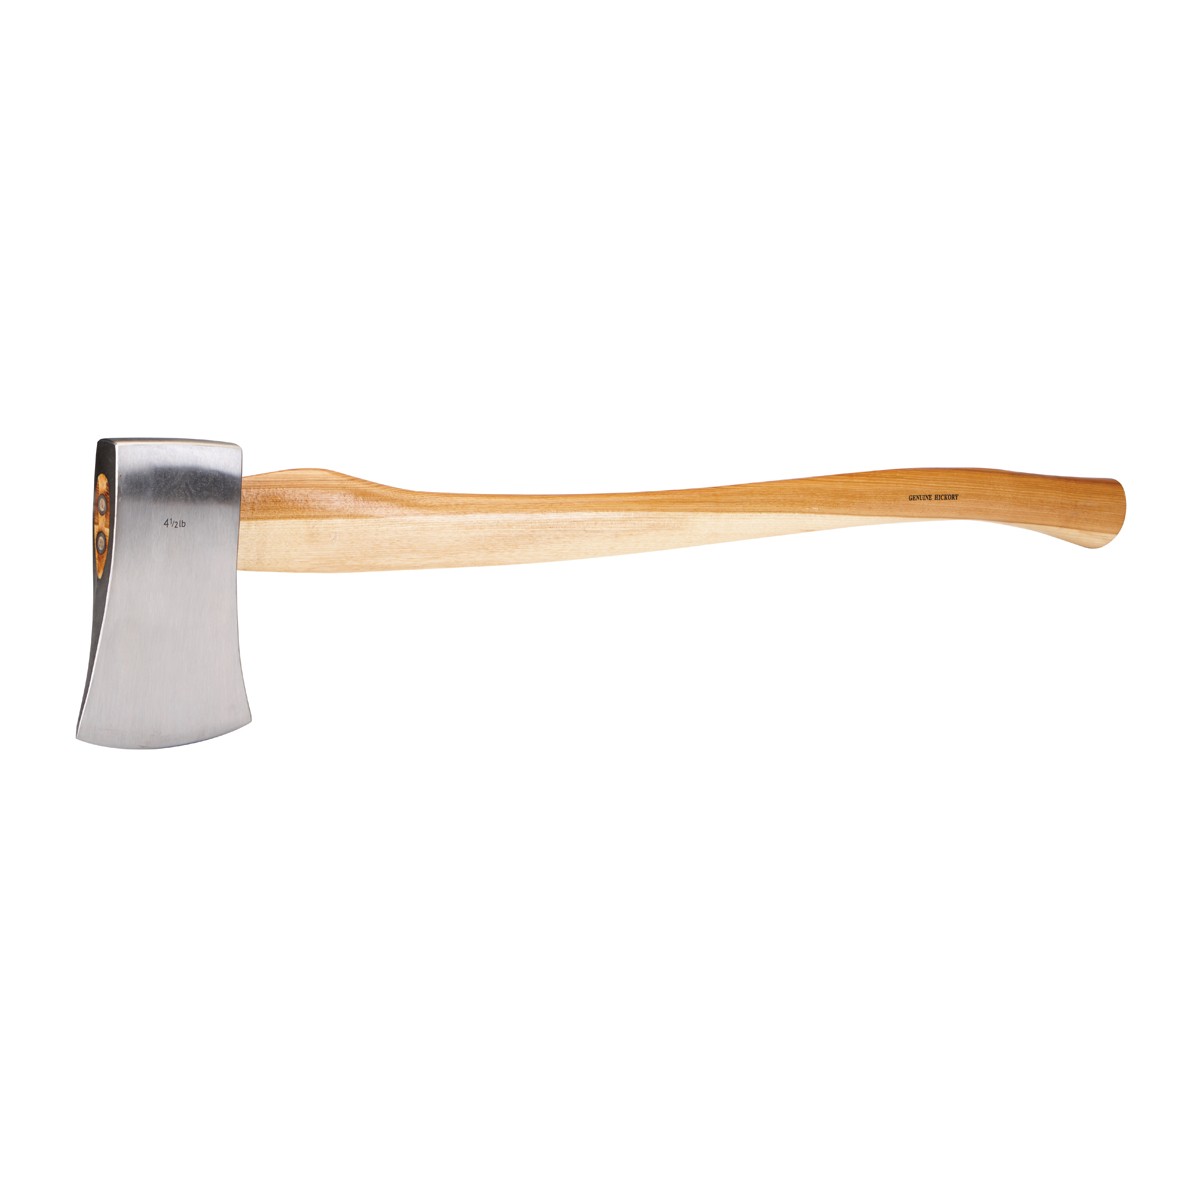 New   Pittsburgh  4-1/2 lb. Hickory Axe